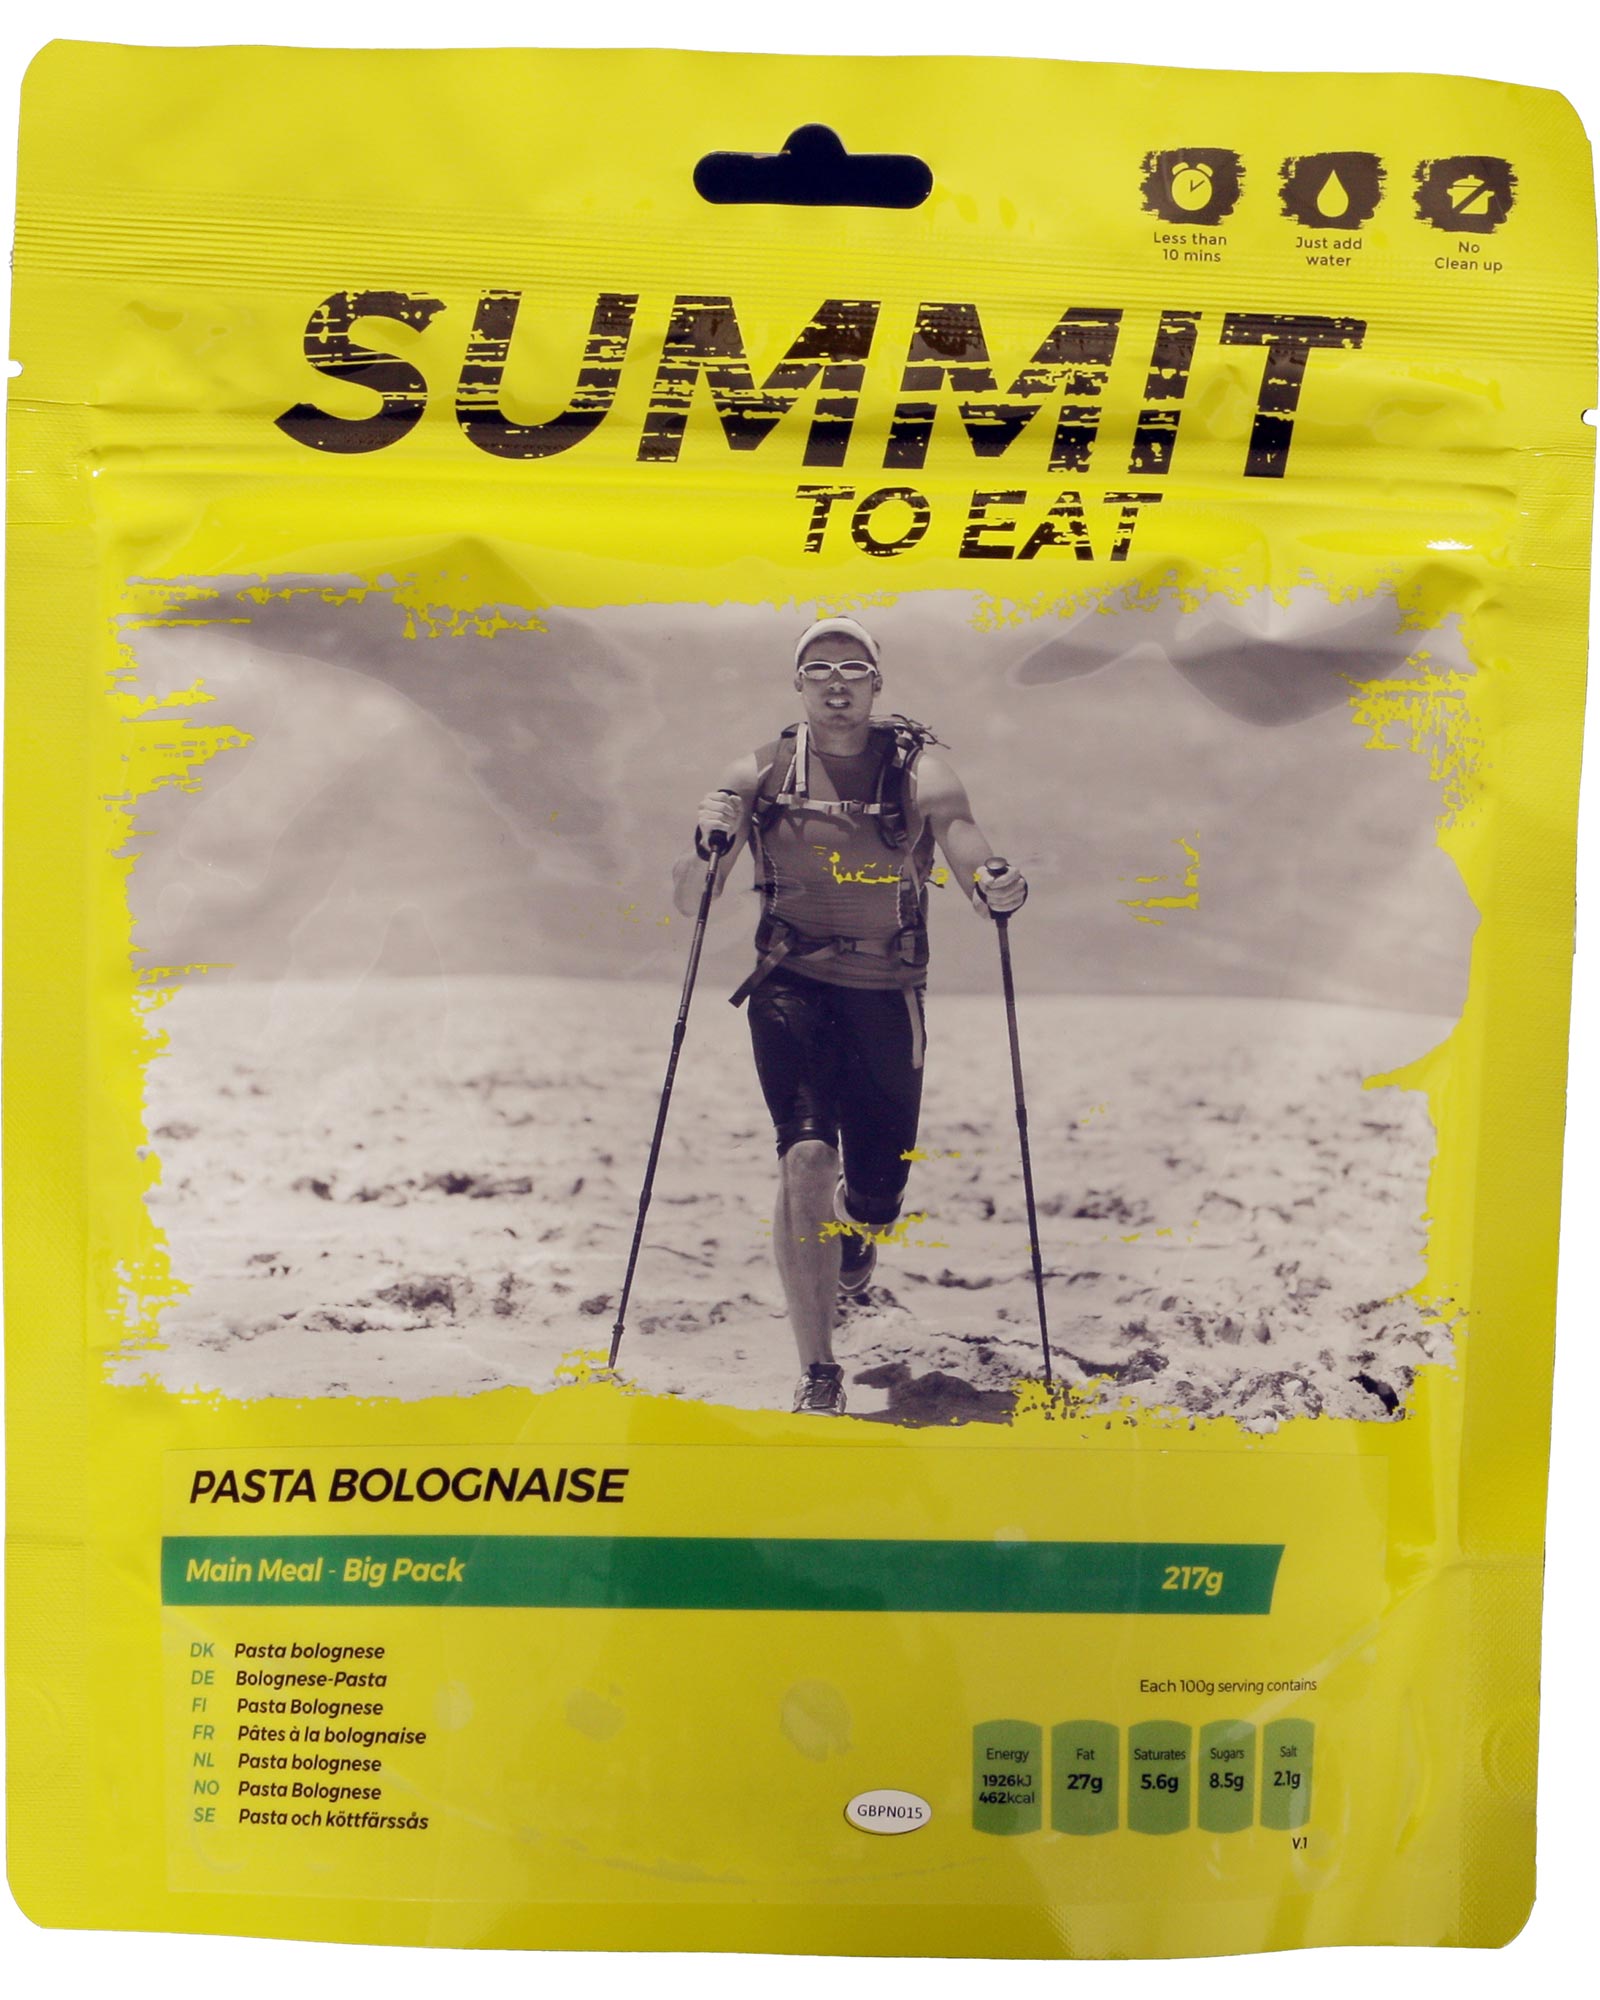 Summit To Eat Pasta Bolognaise - Big Pack Camping Food